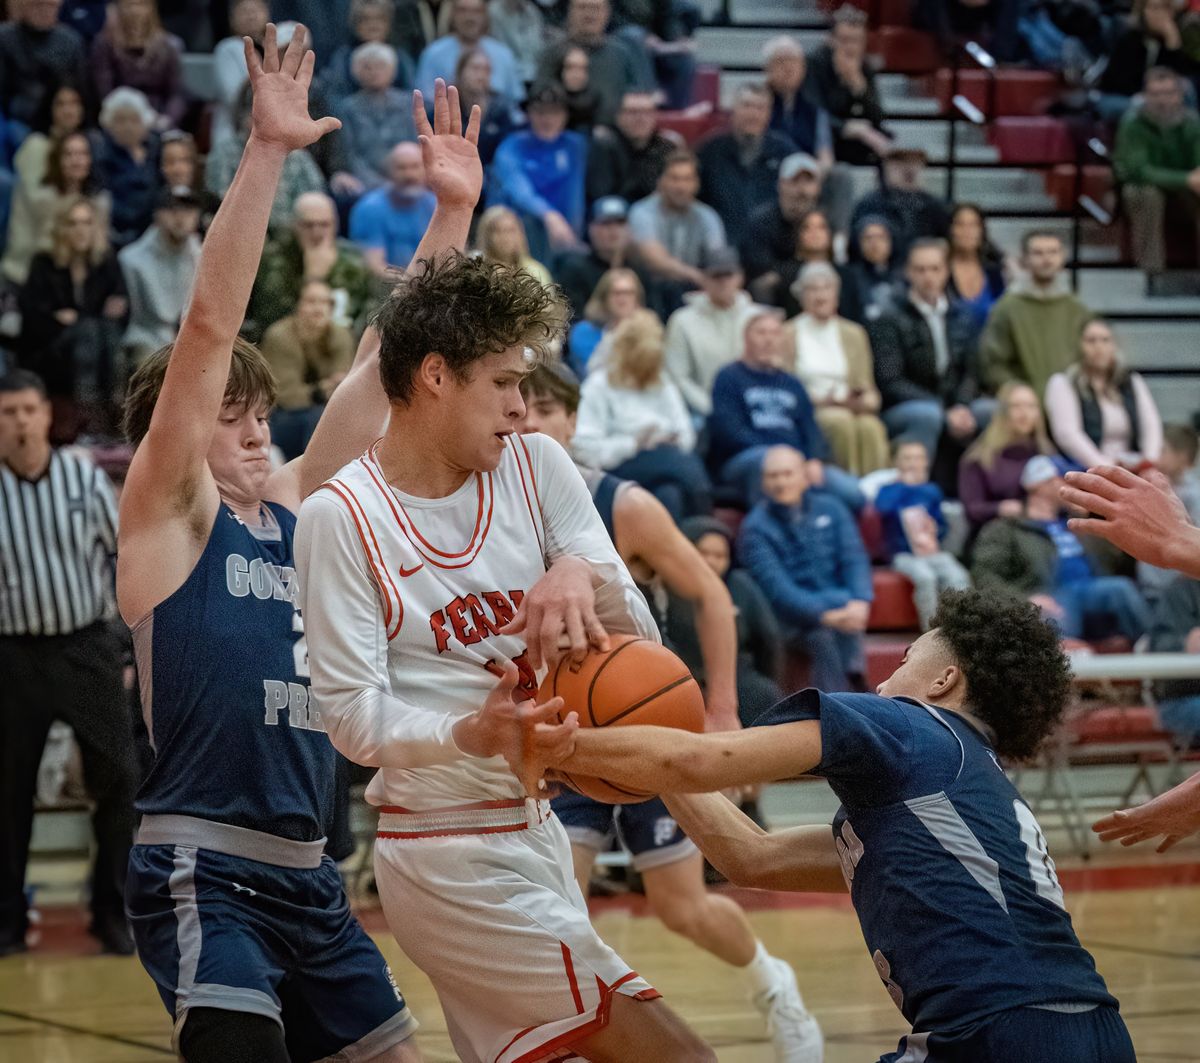 Gonzaga Prep guard Jayce Swanson fouls Ferris guard Dylan Skaife during Friday’s Greater Spokane League basketball game at Ferris High School.  (Colin Mulvany/The Spokesman-Review)